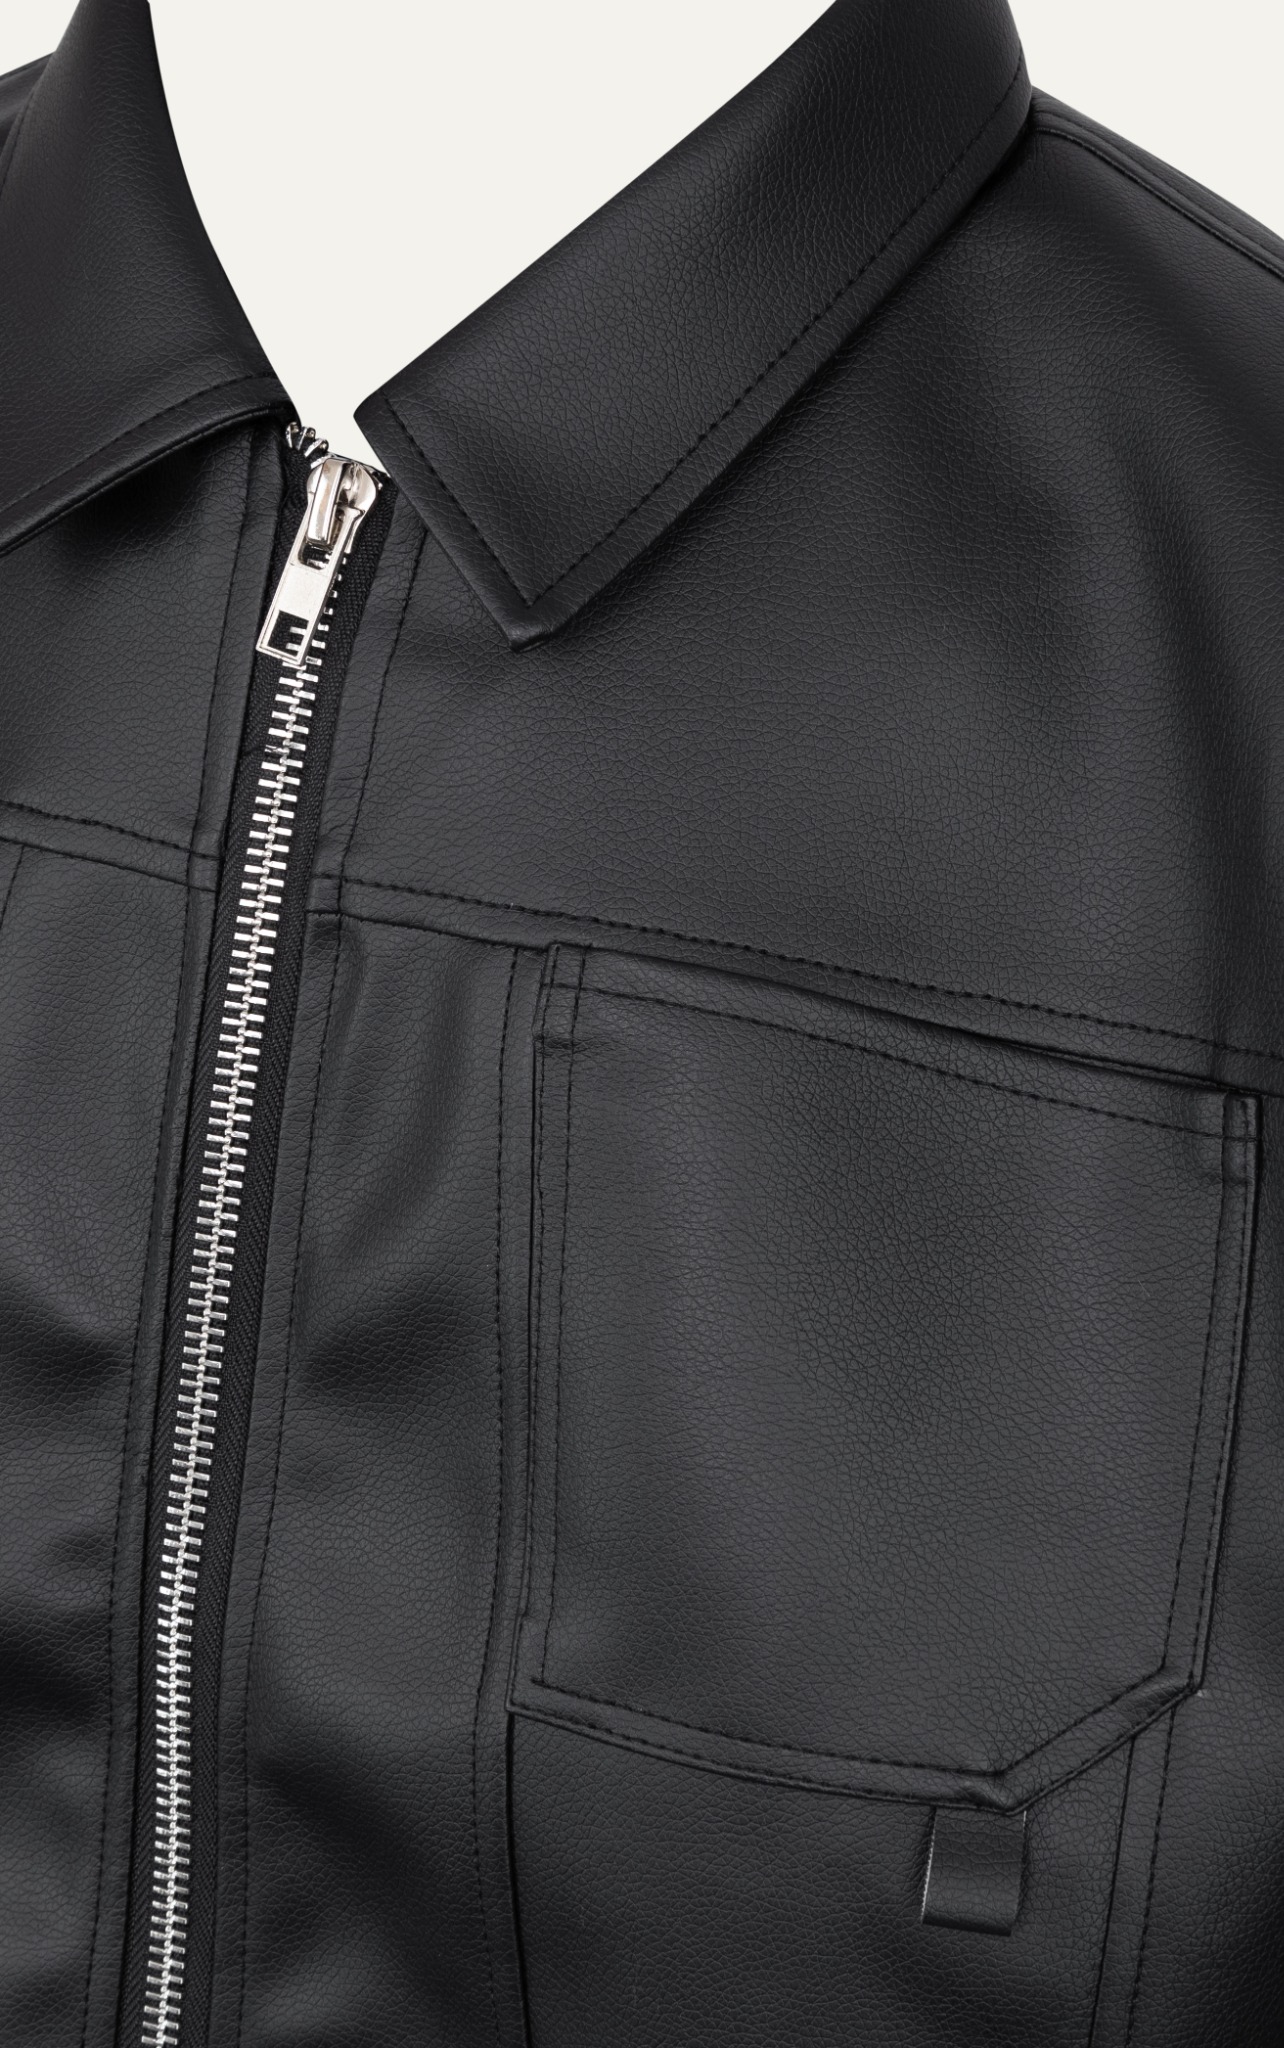 AG09 JACKET LEATHER IN BLACK